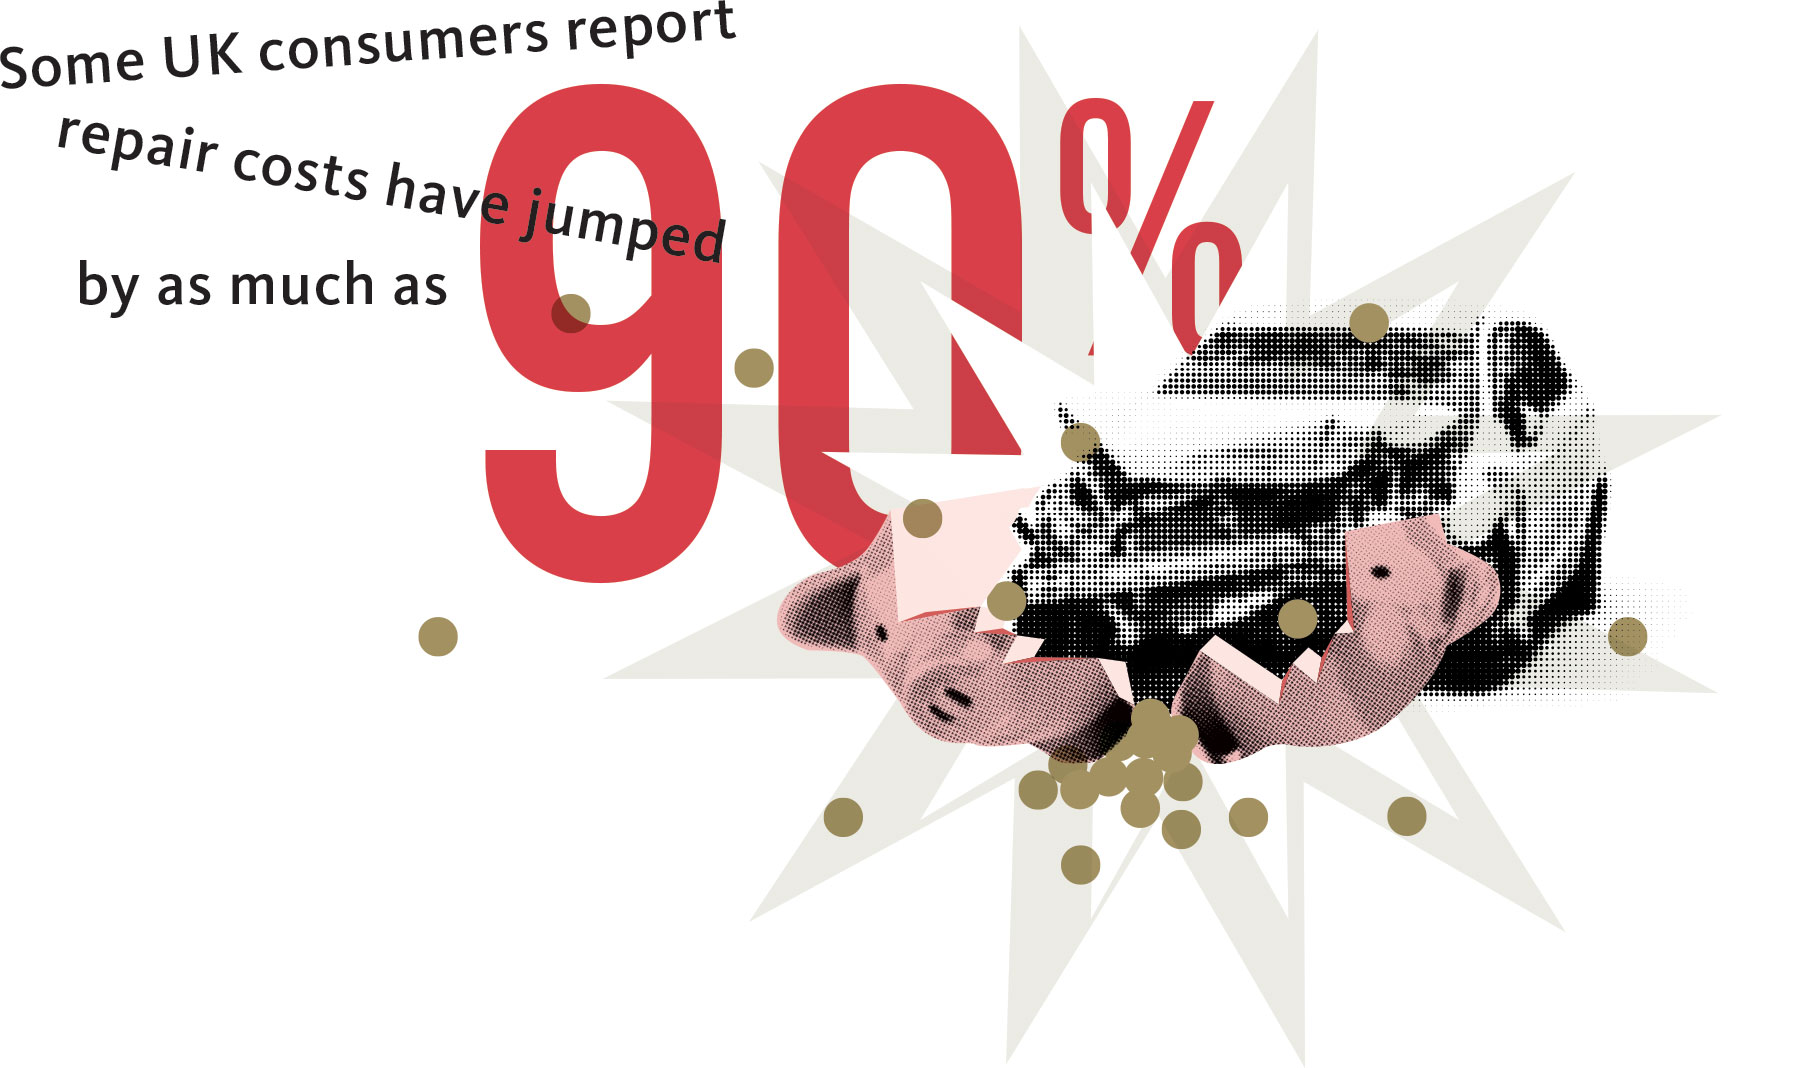 Some UK consumers report repair costs have jumped by as much as 90%.